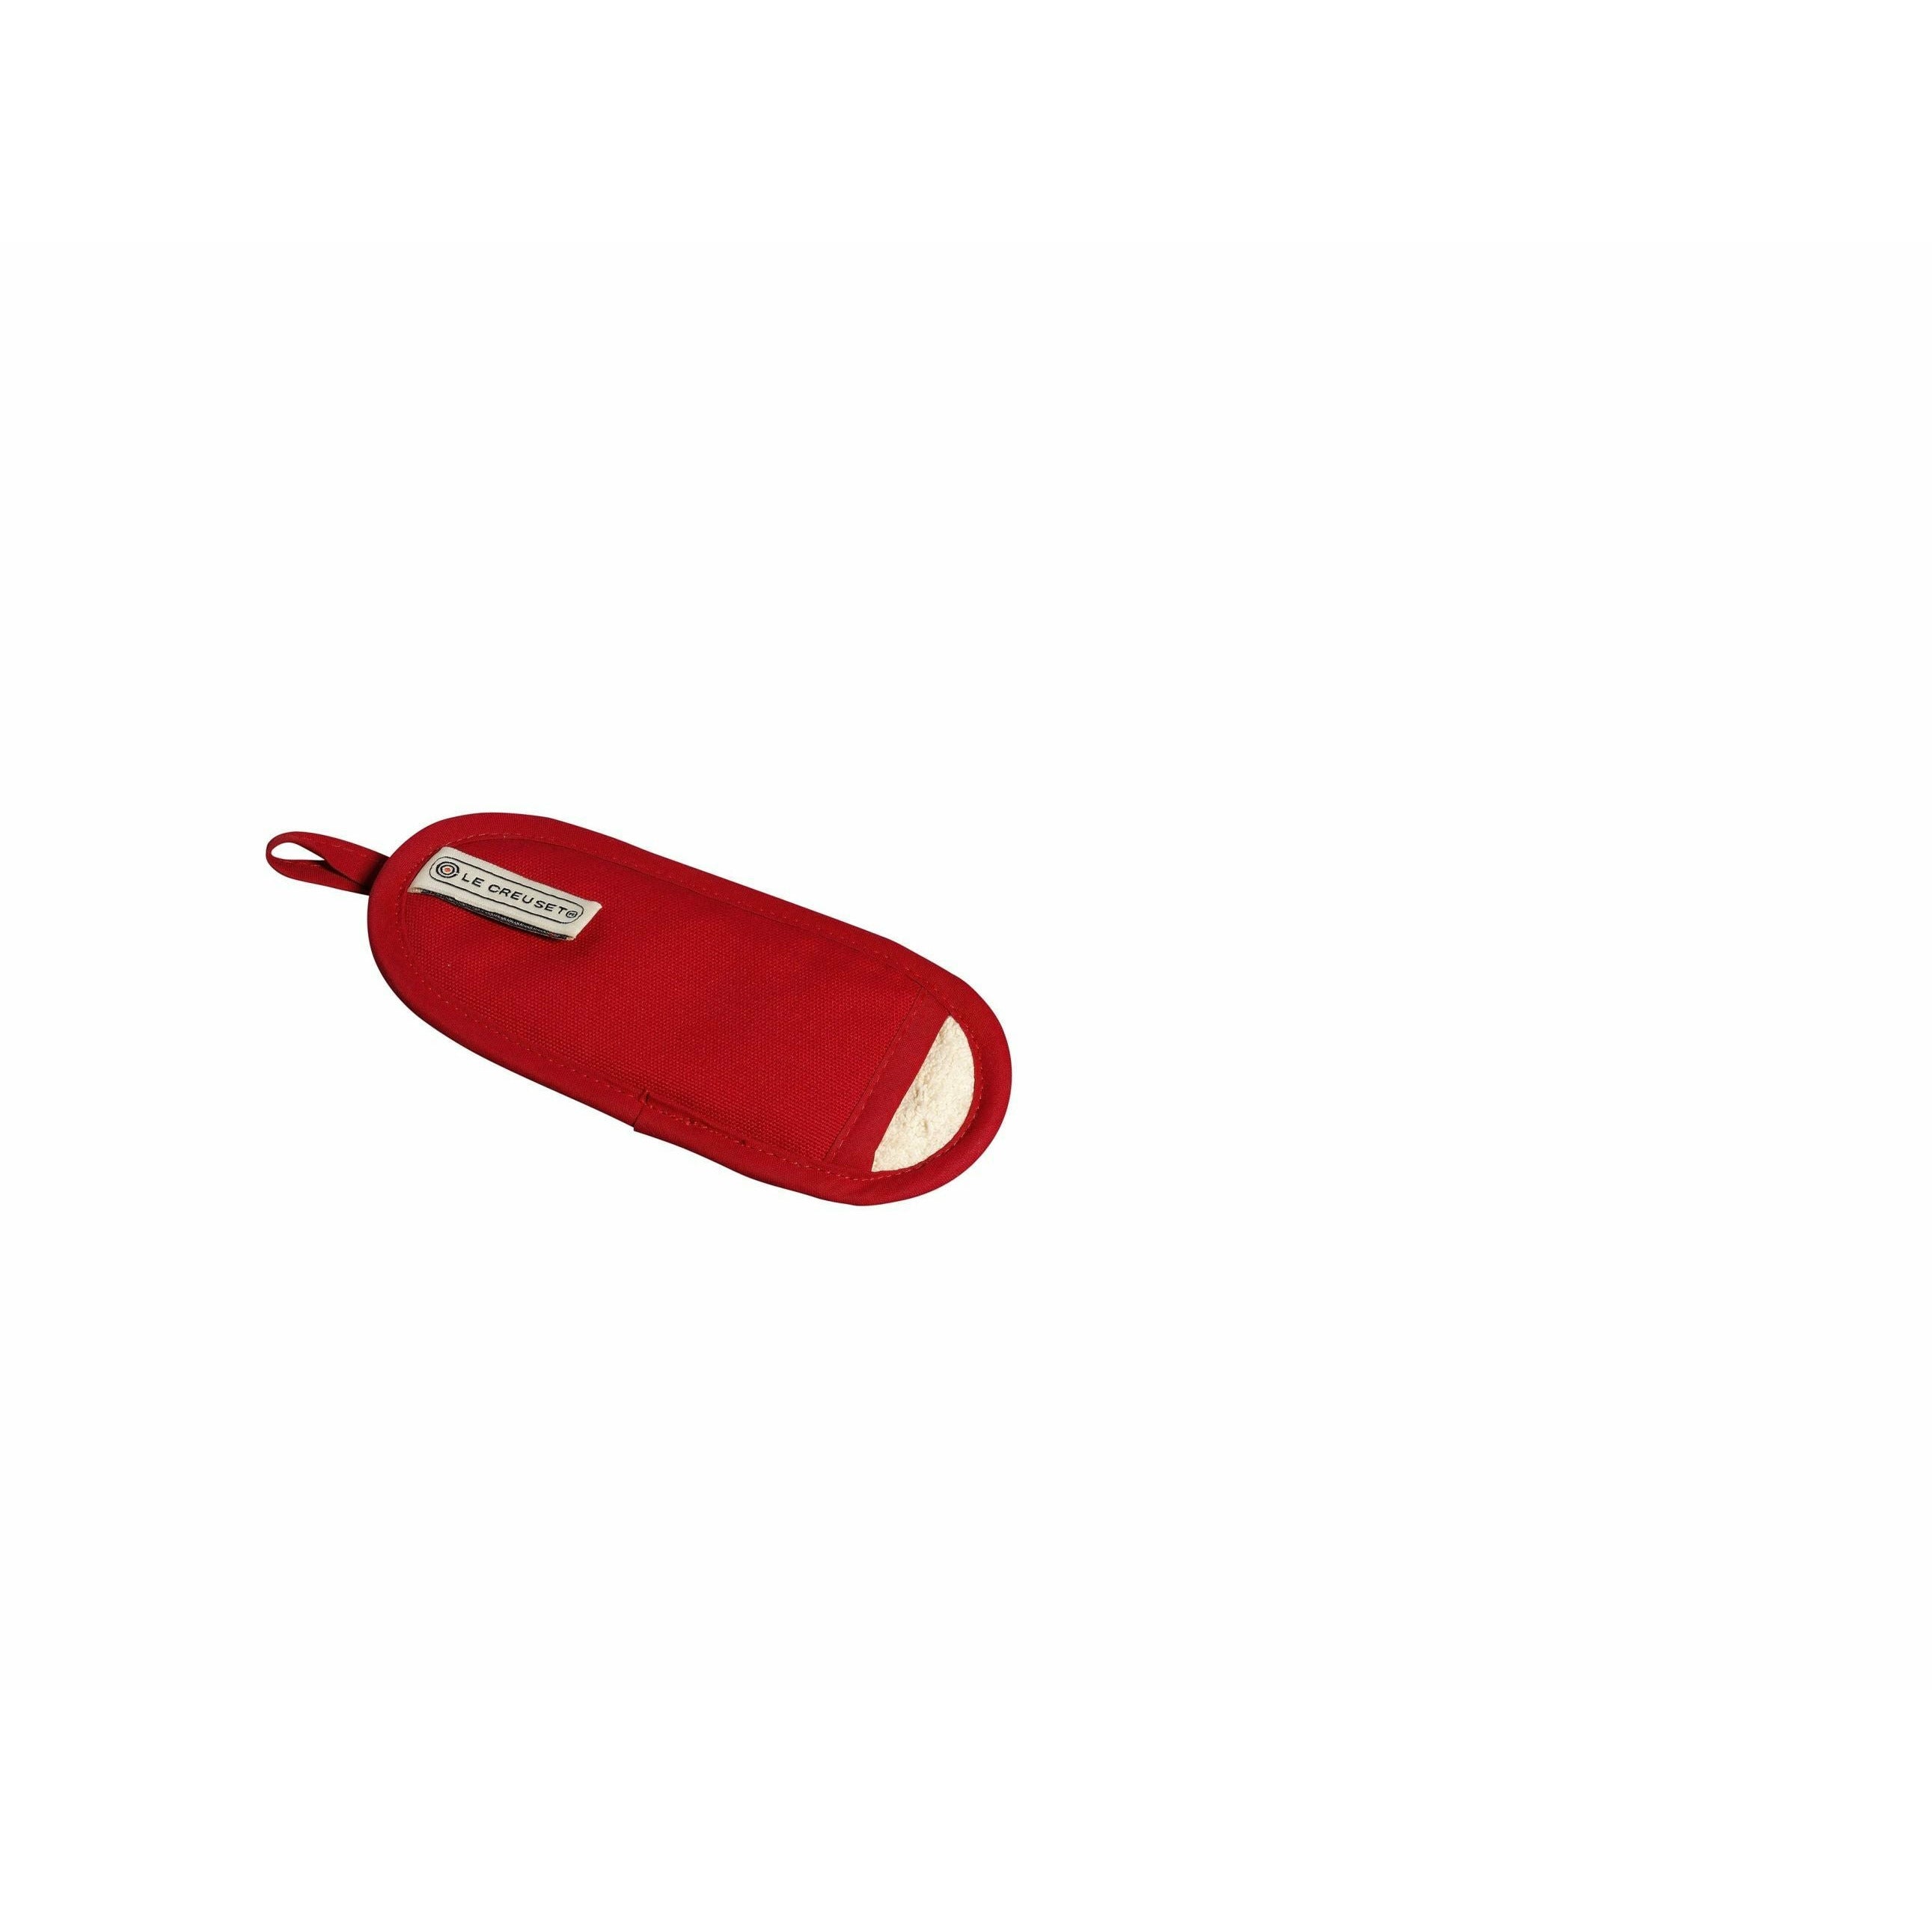 Le Creuset Handle Cover 18 X 8 Cm, Cherry Red